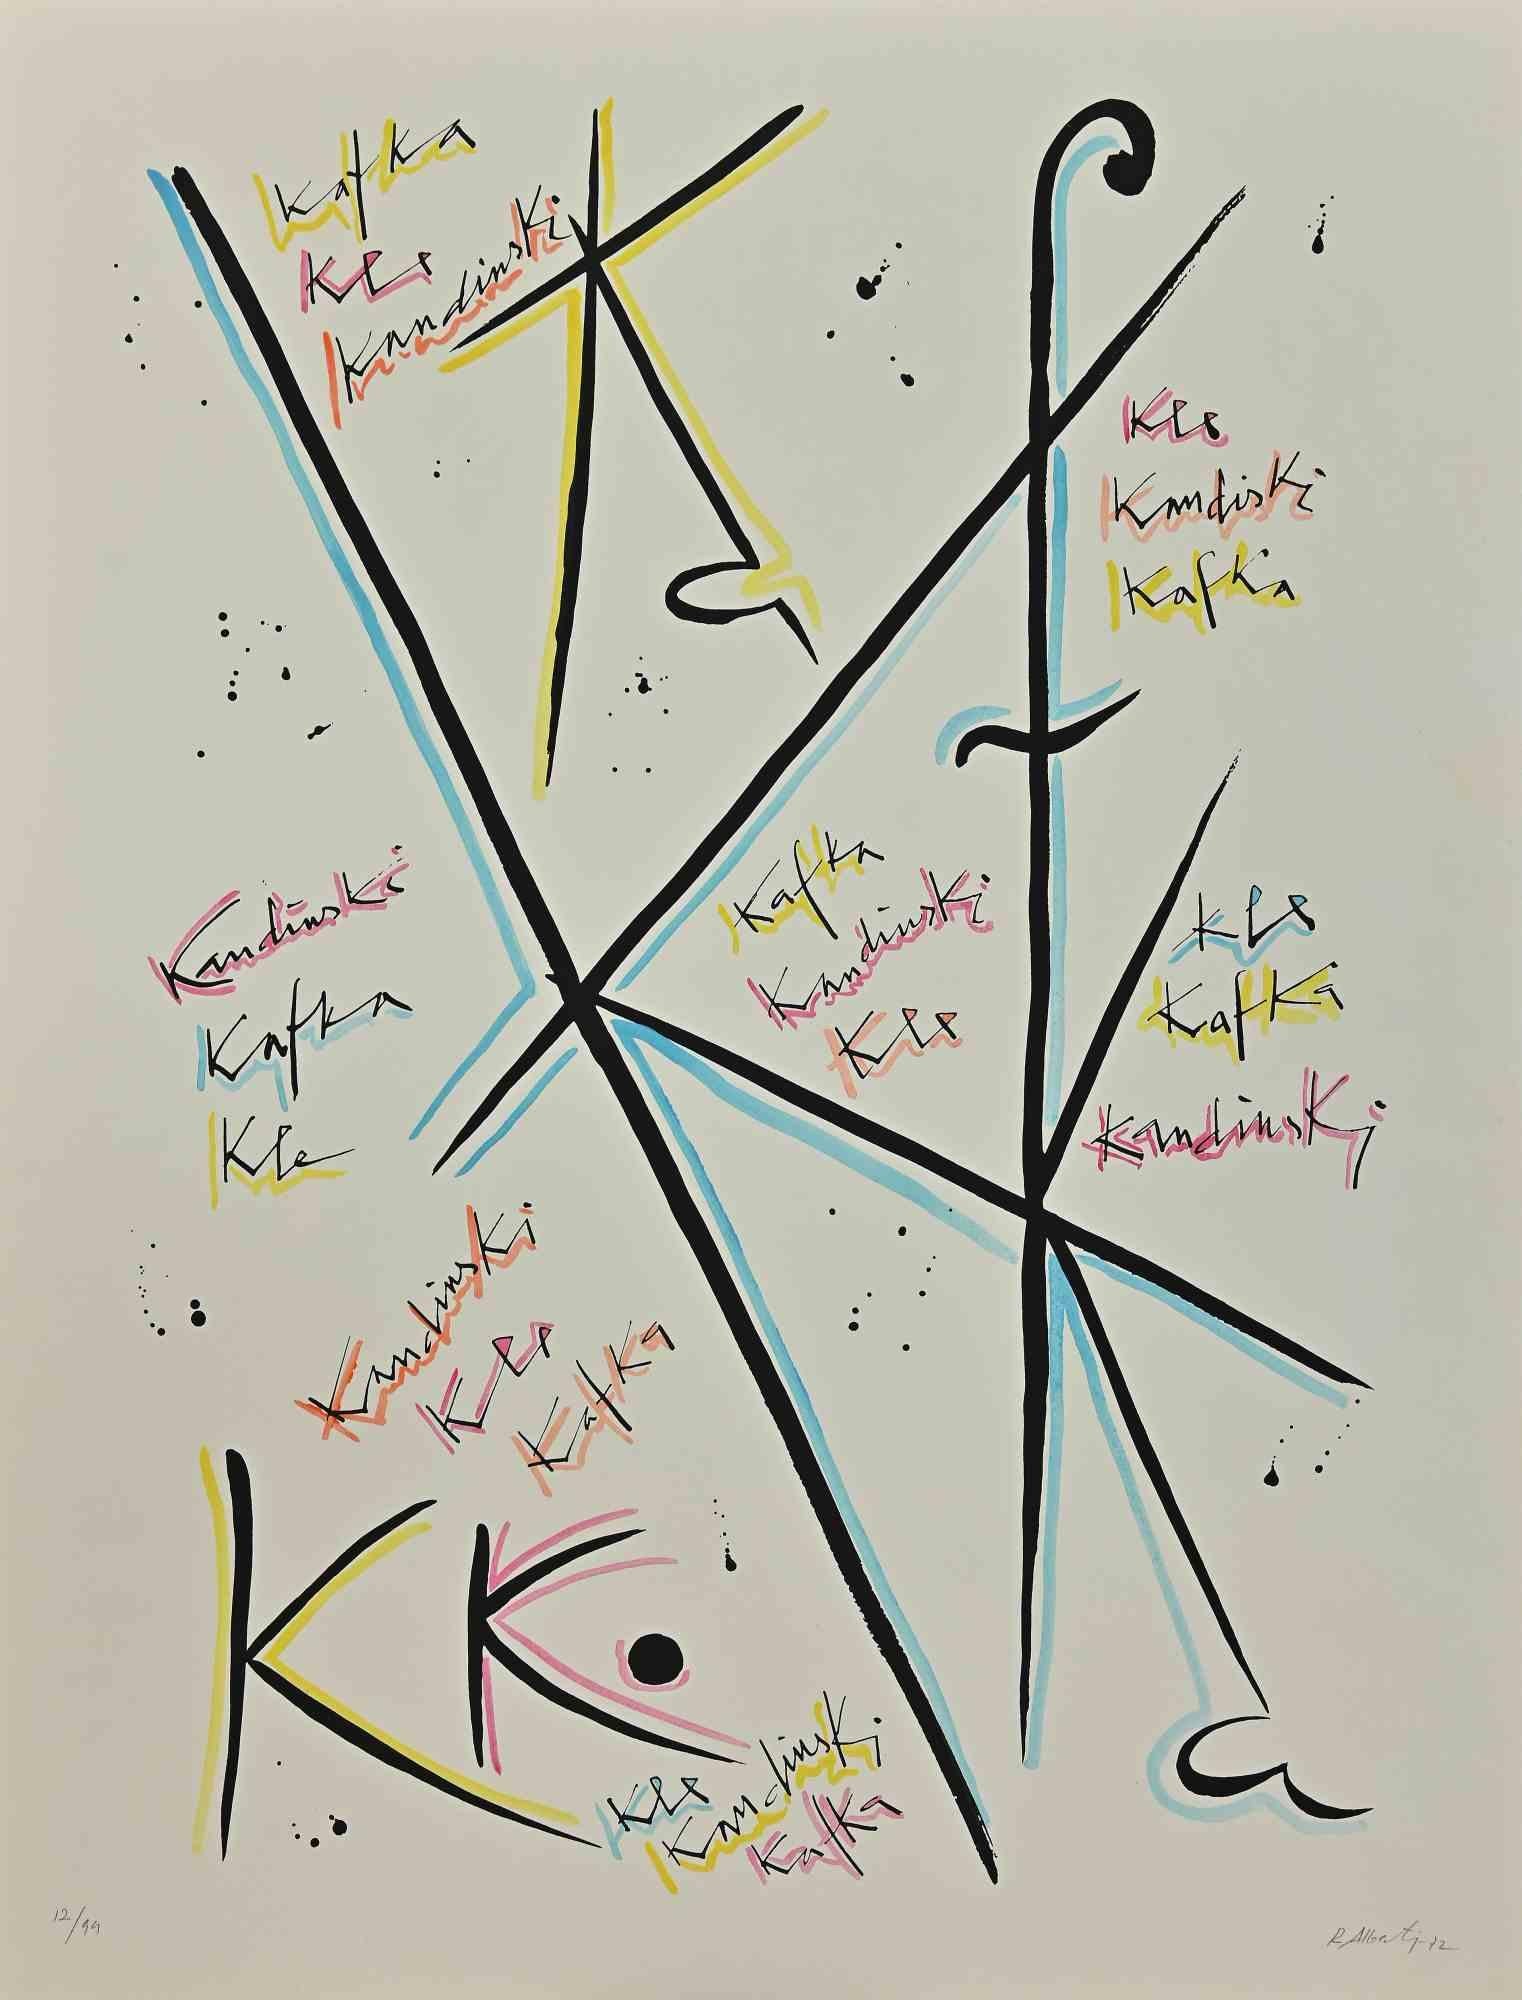 Letter K from the Alphabet series is a lithograph realized by Rafael Alberti in 1972.

Hand-signed on the lower right.

Numbered, edition 12/99.

The state of preservation is good.

The artwork represents the alphabet letter, with a poetical